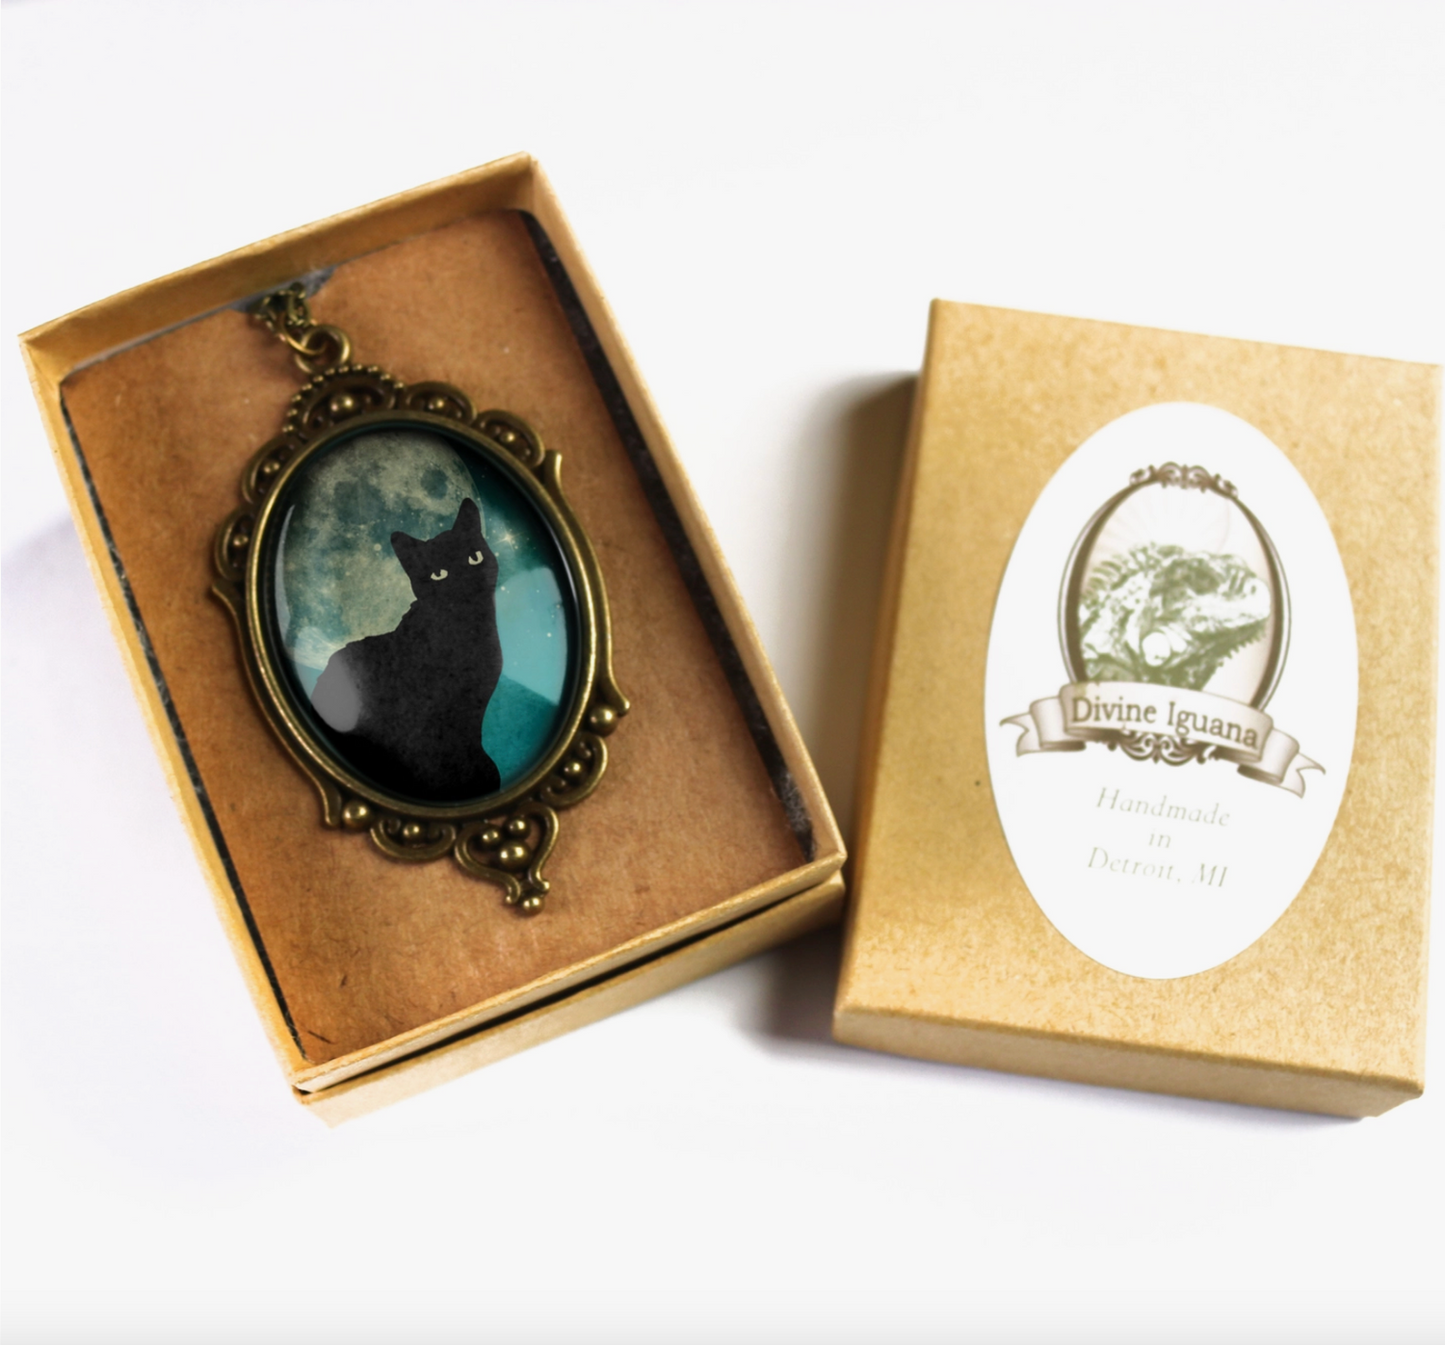 Teal Cat On Full Moon Ornate Oval Halloween Pendant Necklace